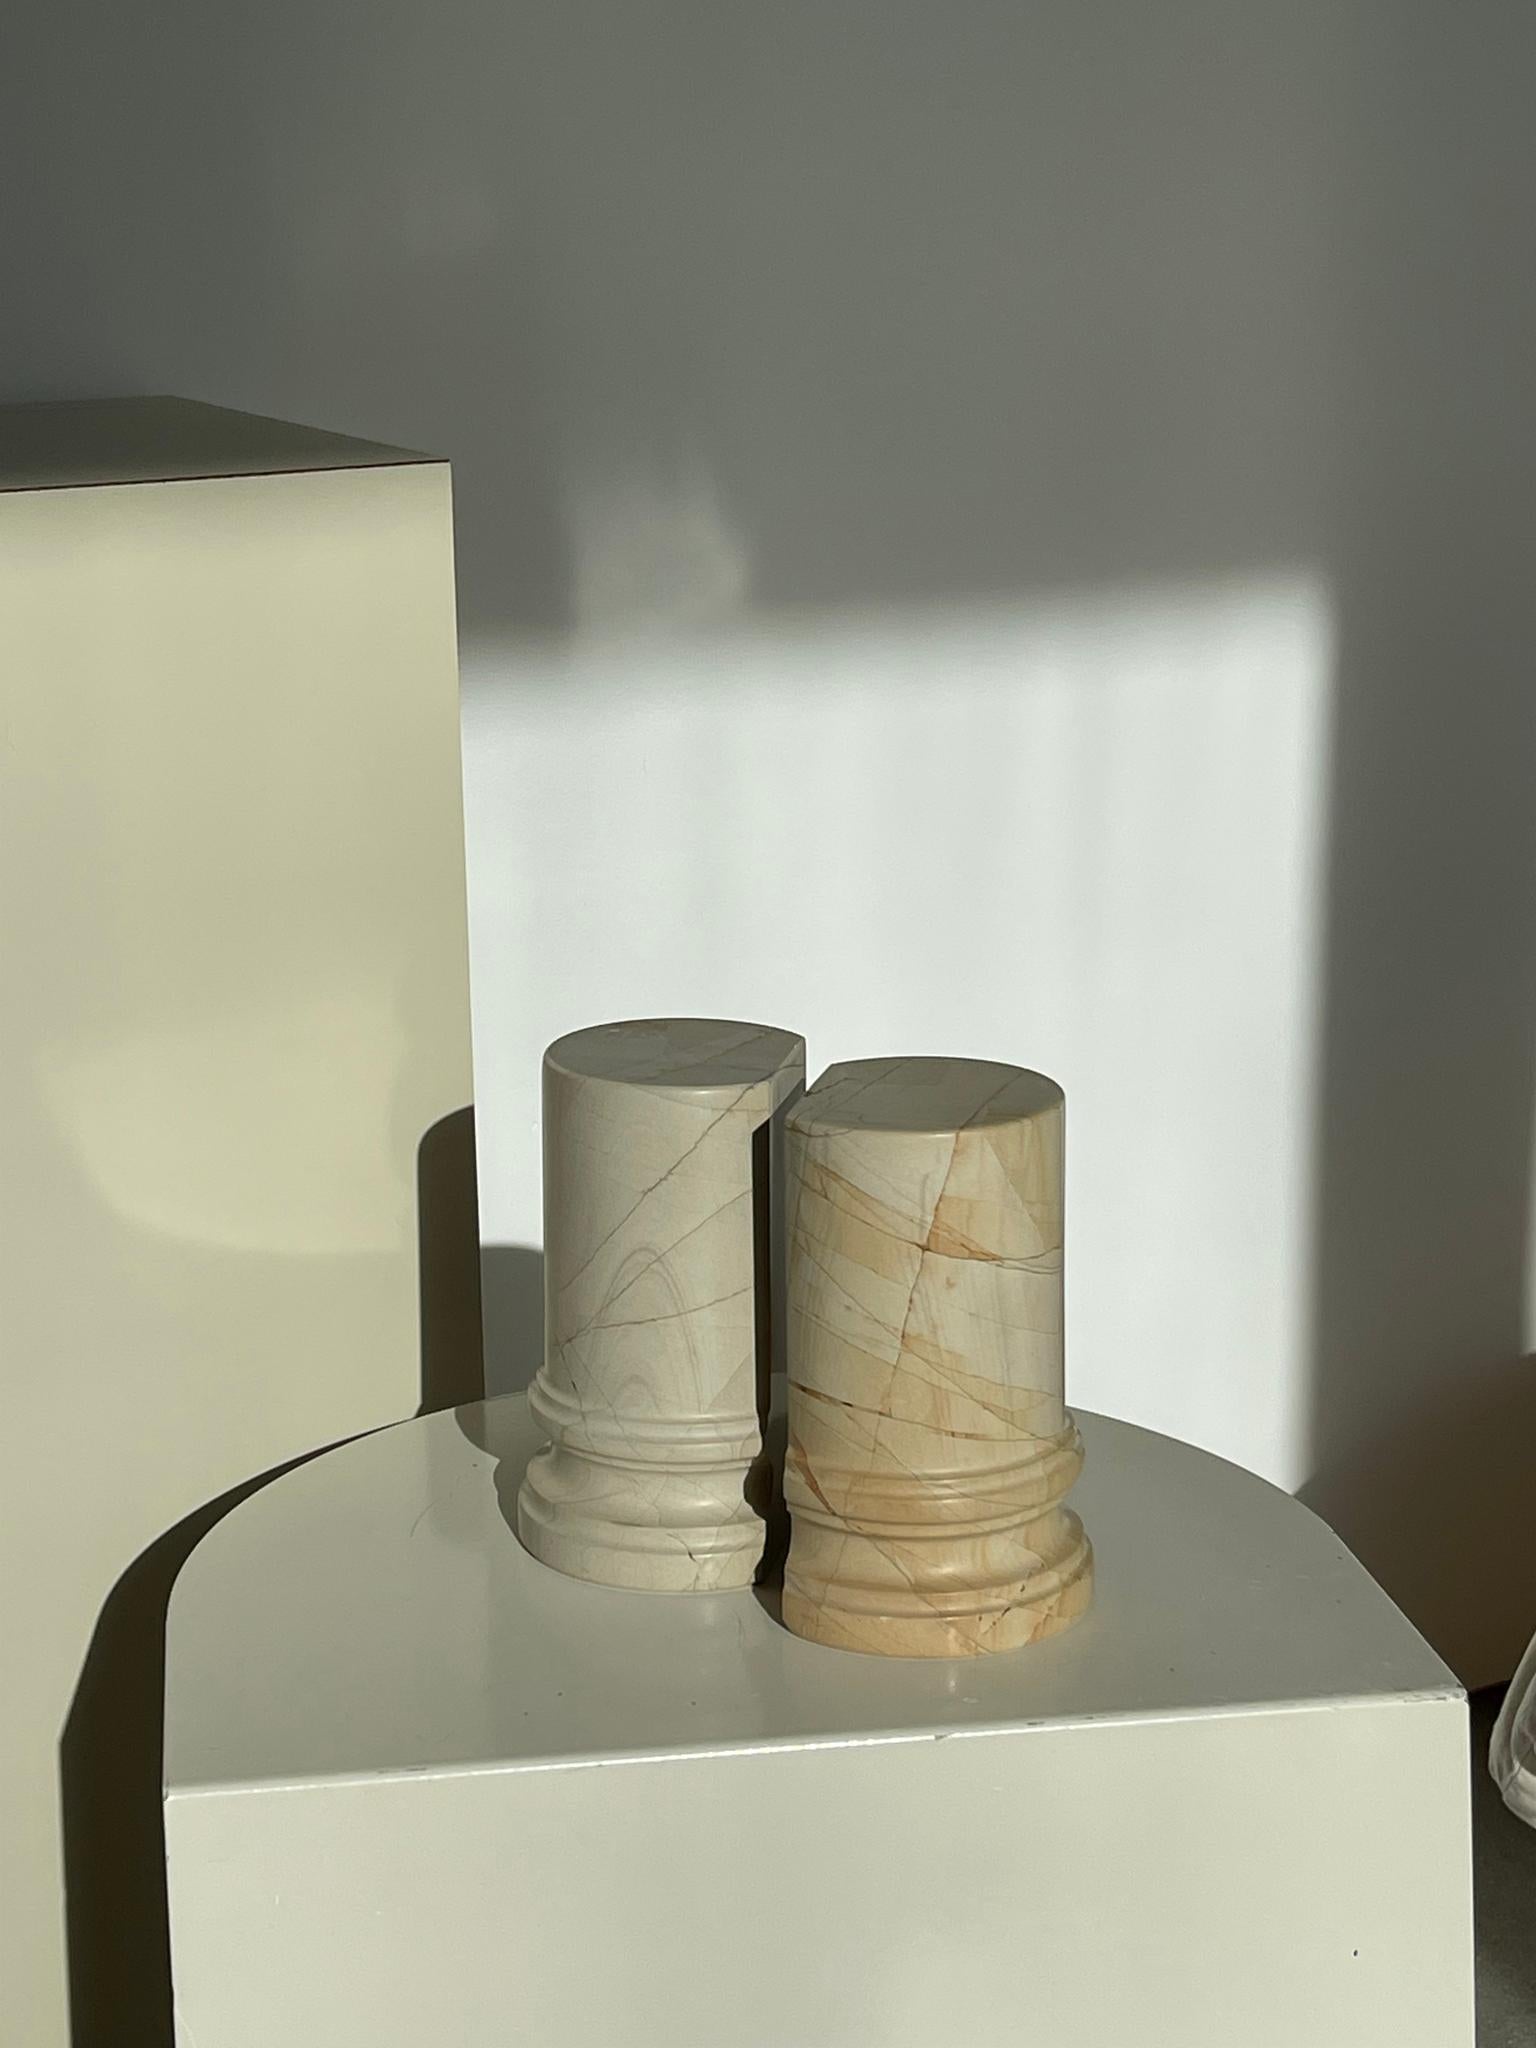 20th century column stone bookends with a beautiful finish with a natural, neutral color.

Dimensions:
4